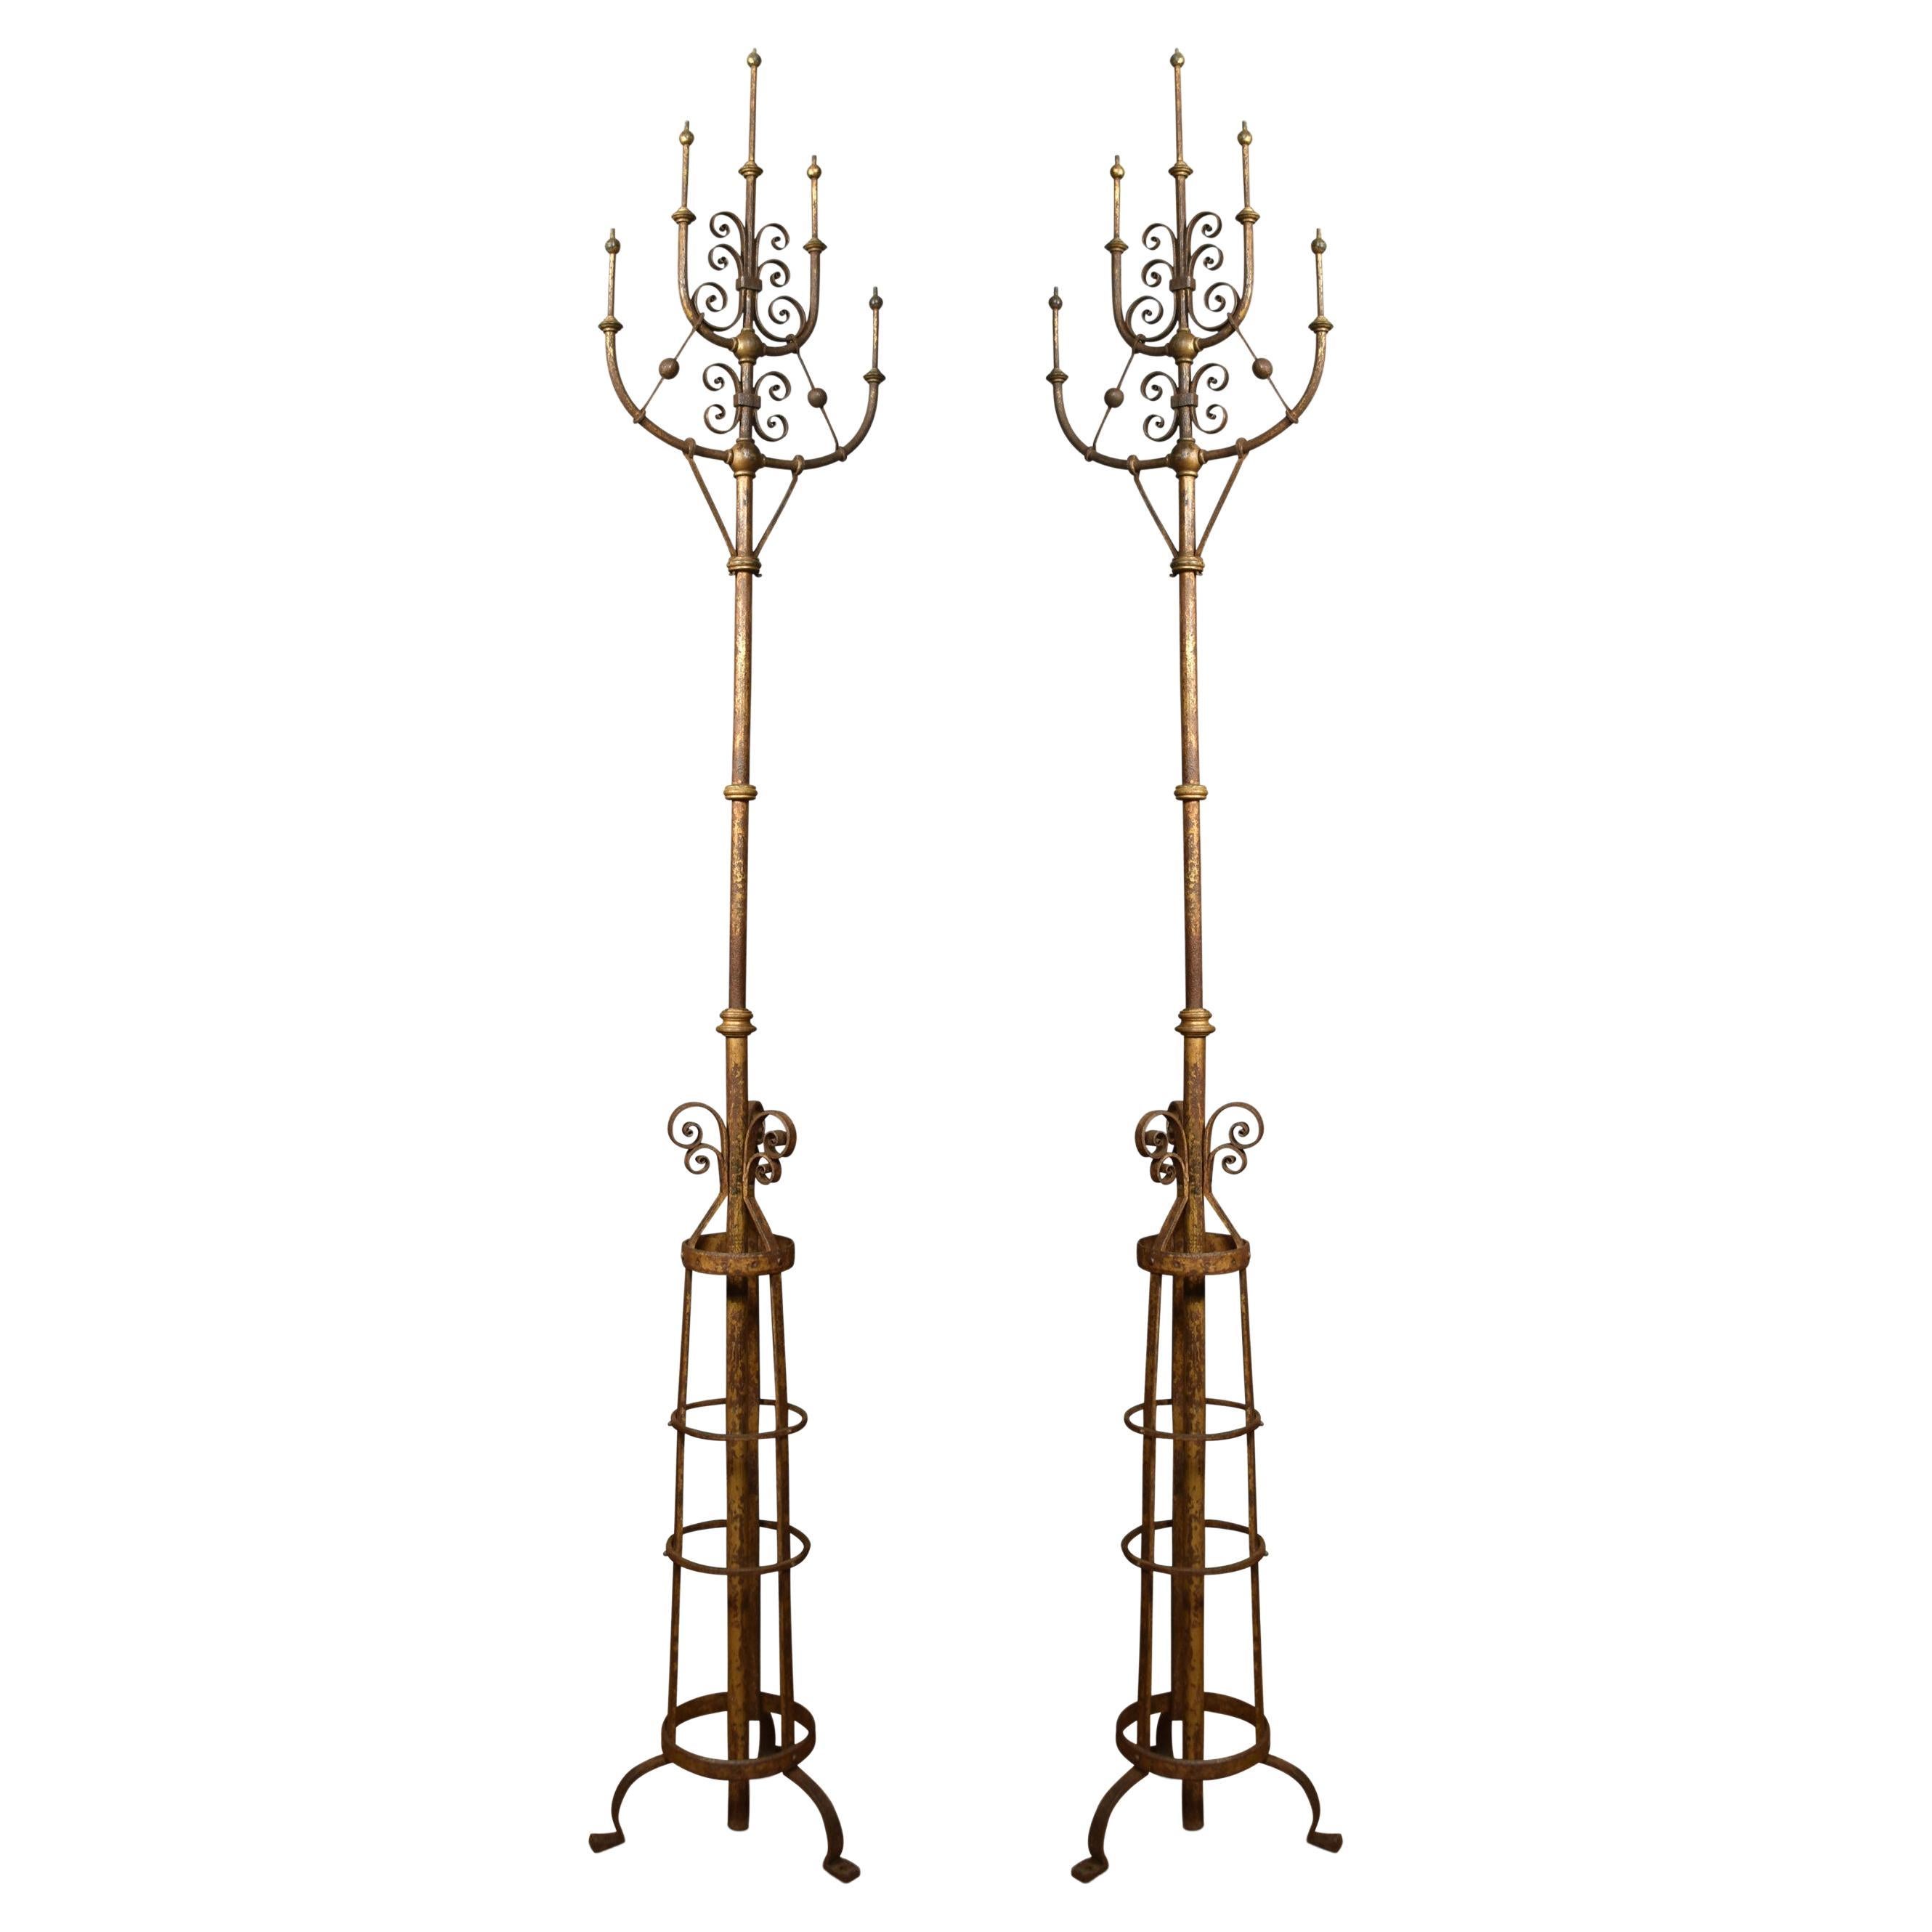 Pair of Cast Iron Gas Light Candelabras For Sale